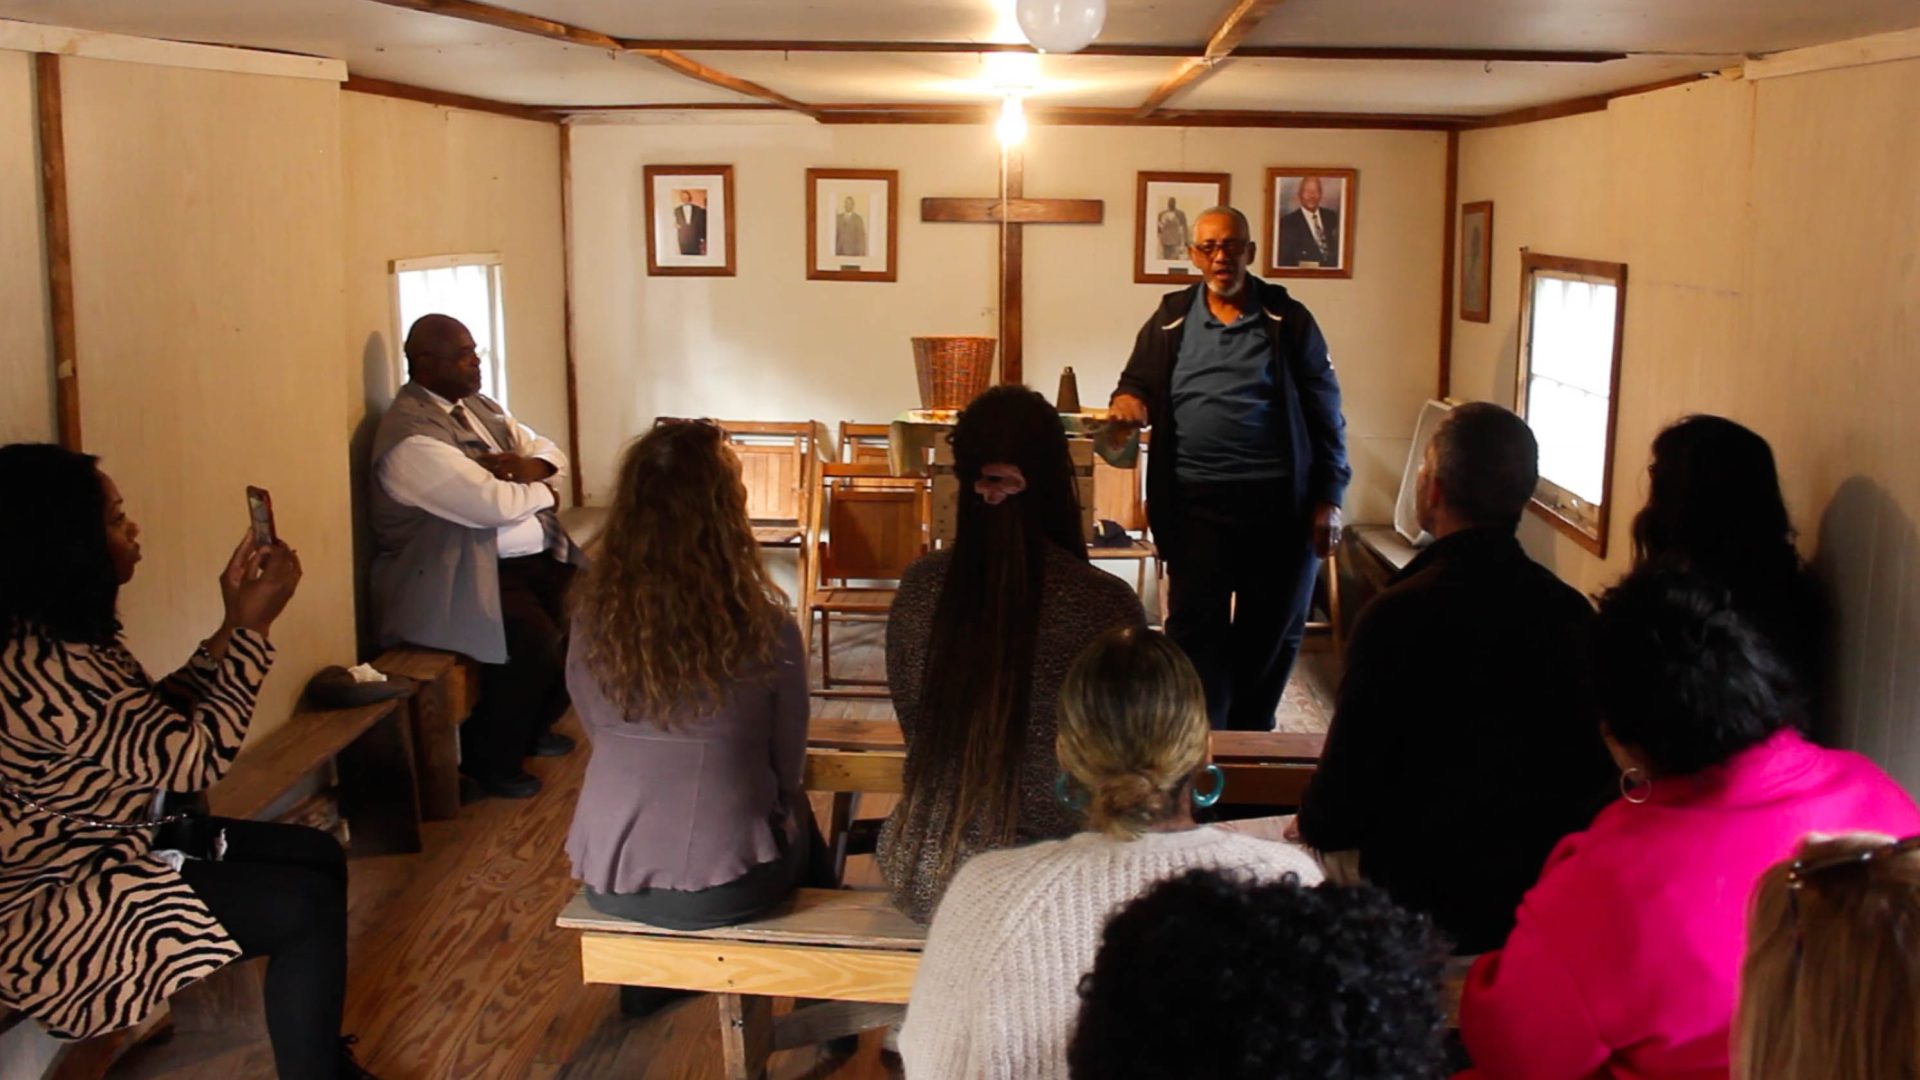 The group at a Praise House, being spoken to by the Reverend.